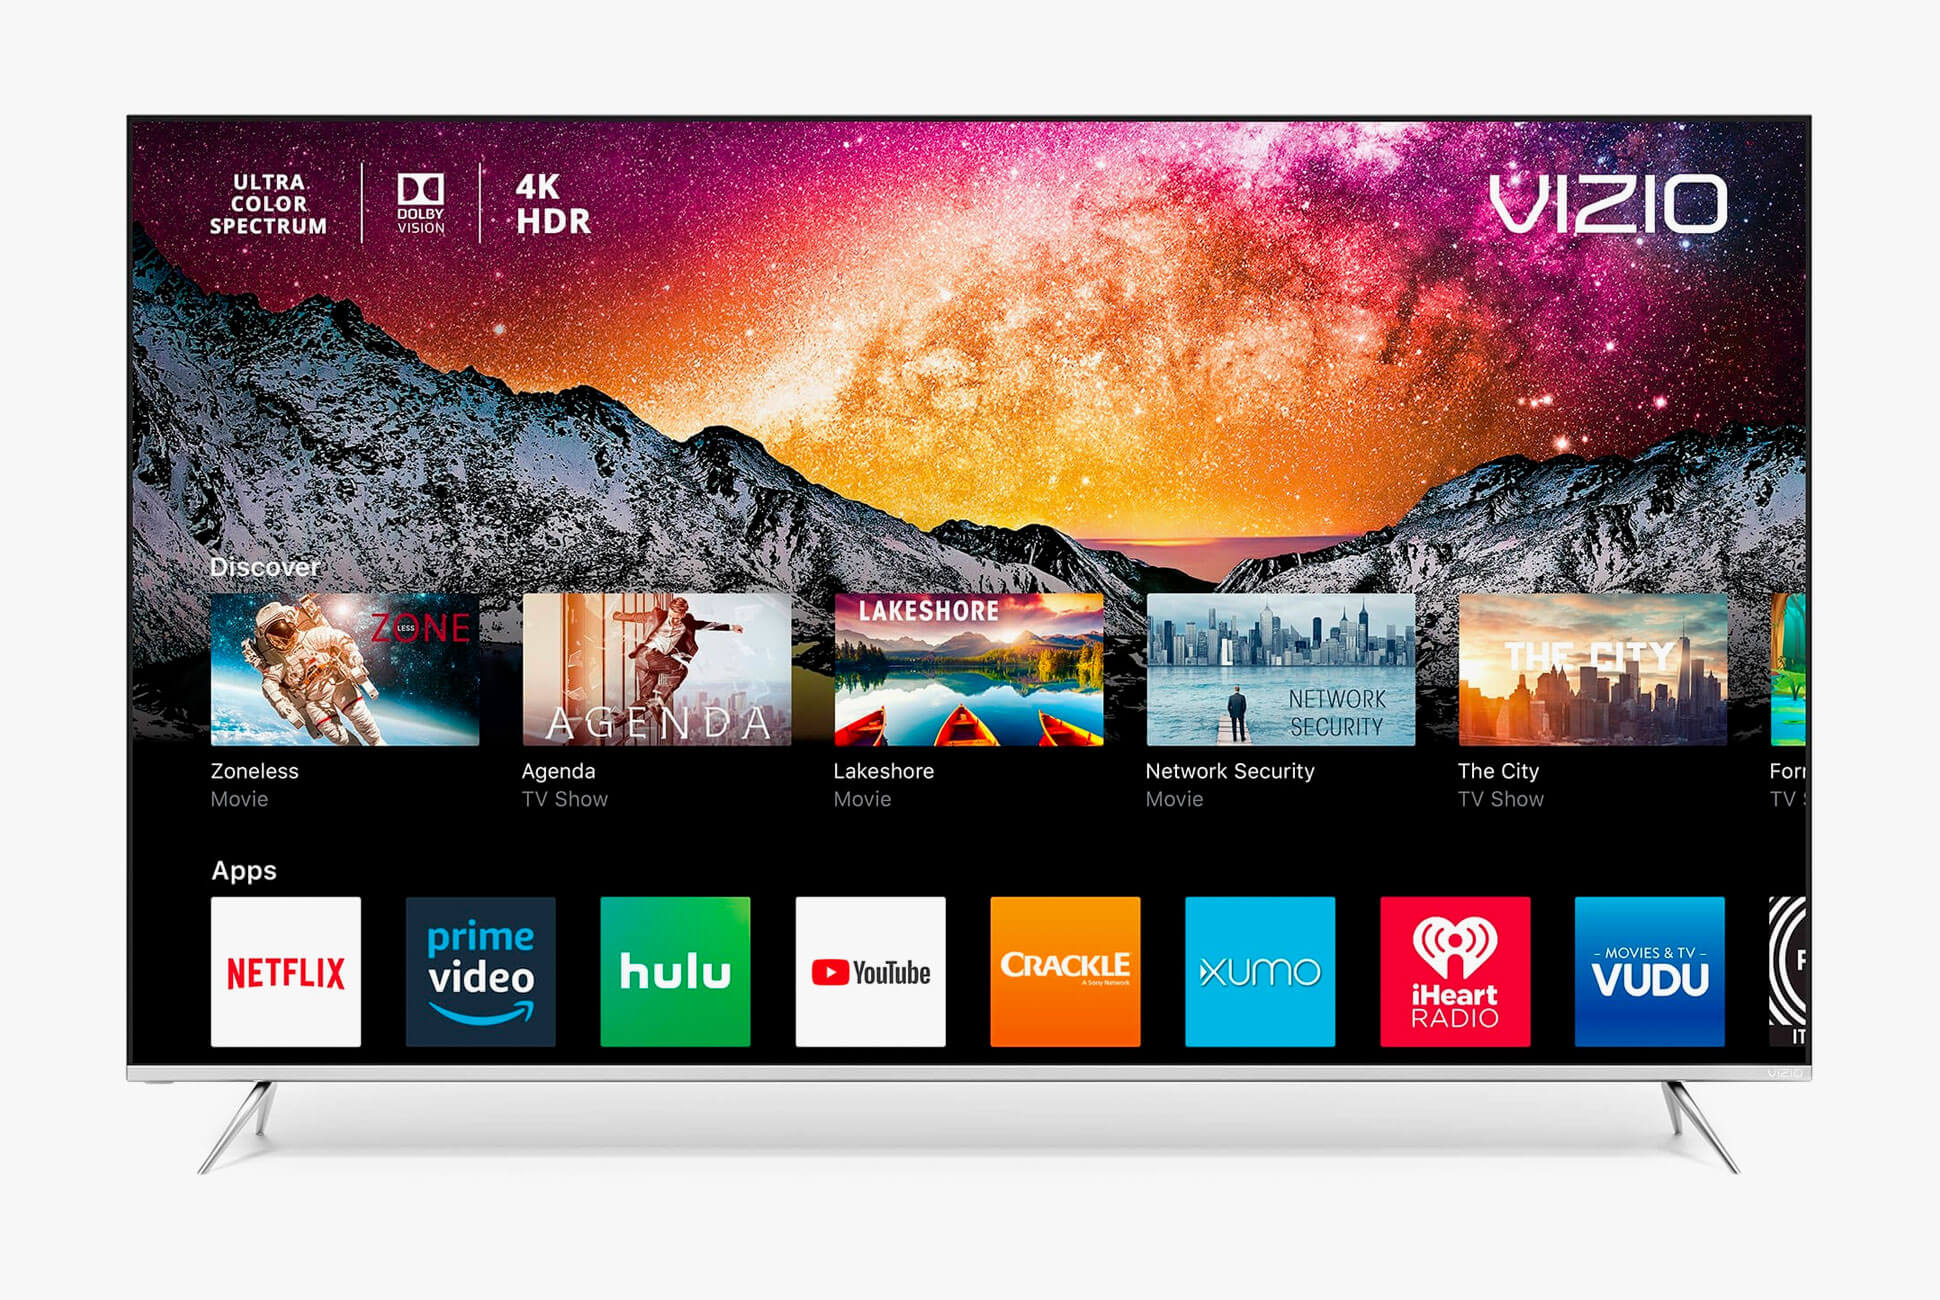 Vizio plans to use future generation TVs for targeted ad serving